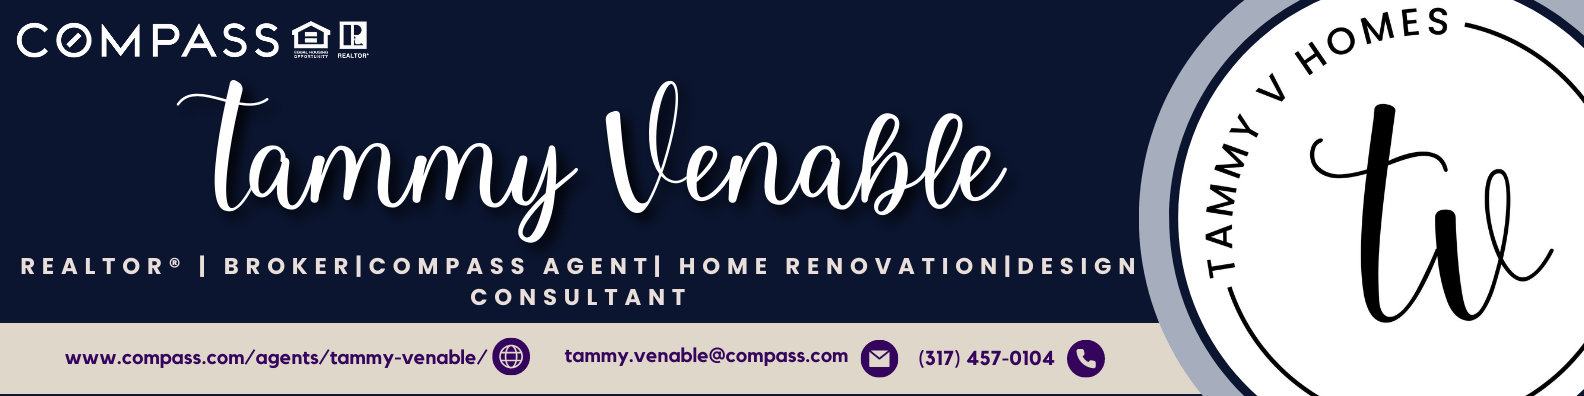 A text banner for Compass agent home renovation design consultancy.